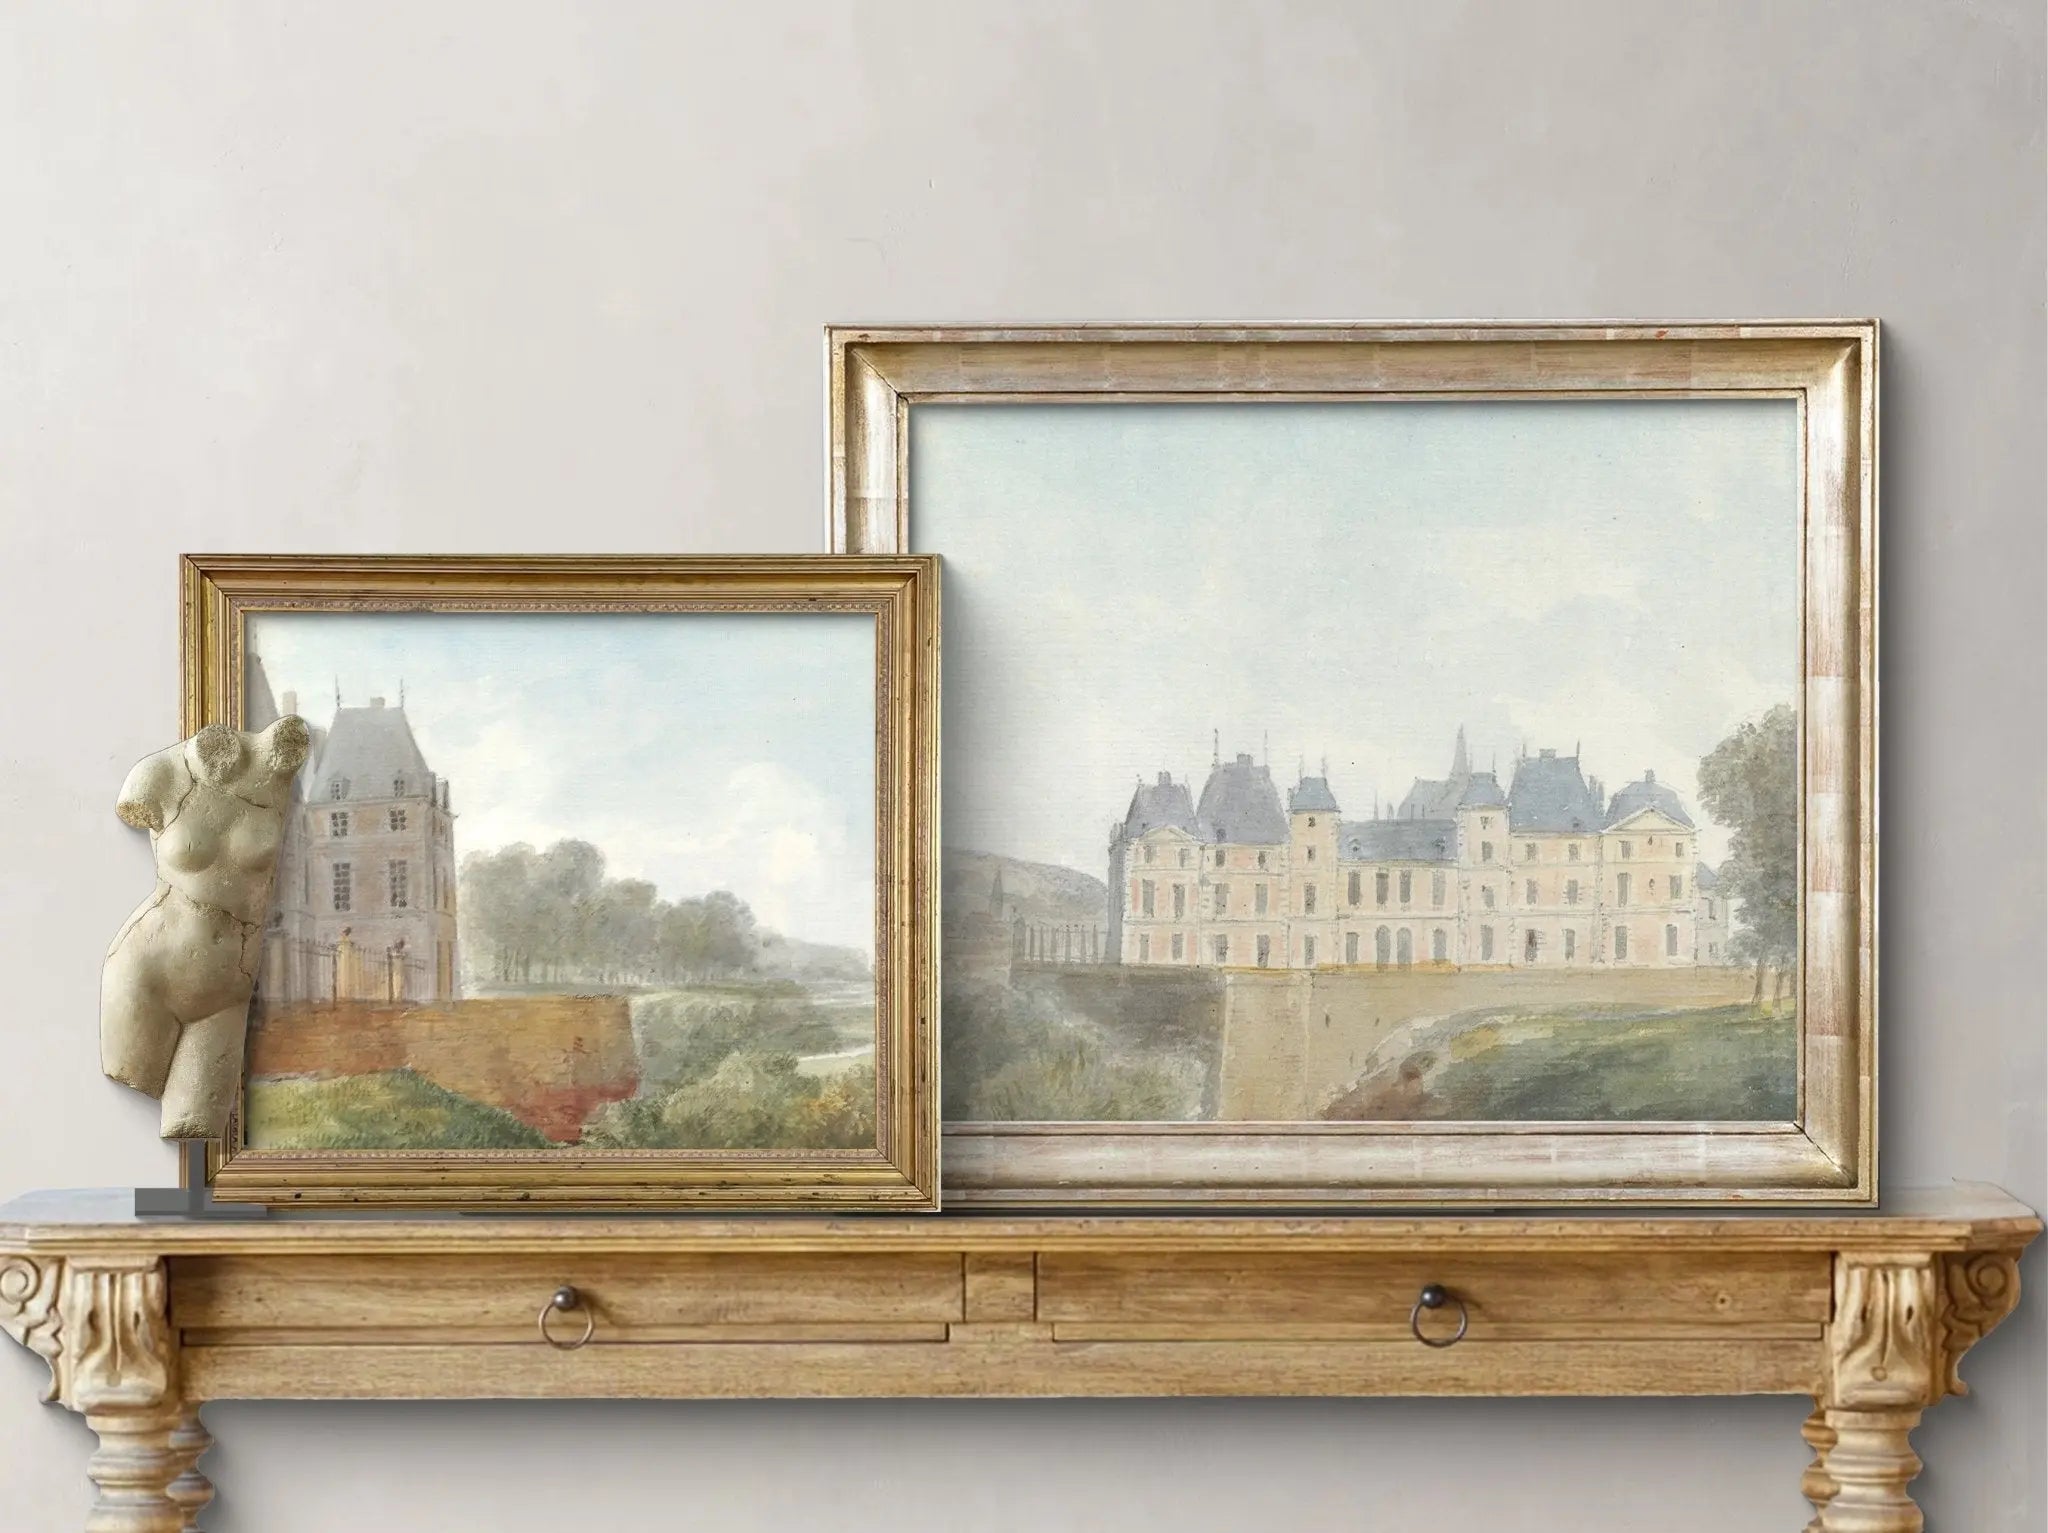 Study of a Chateau: French Country Watercolors - Emblem Atelier